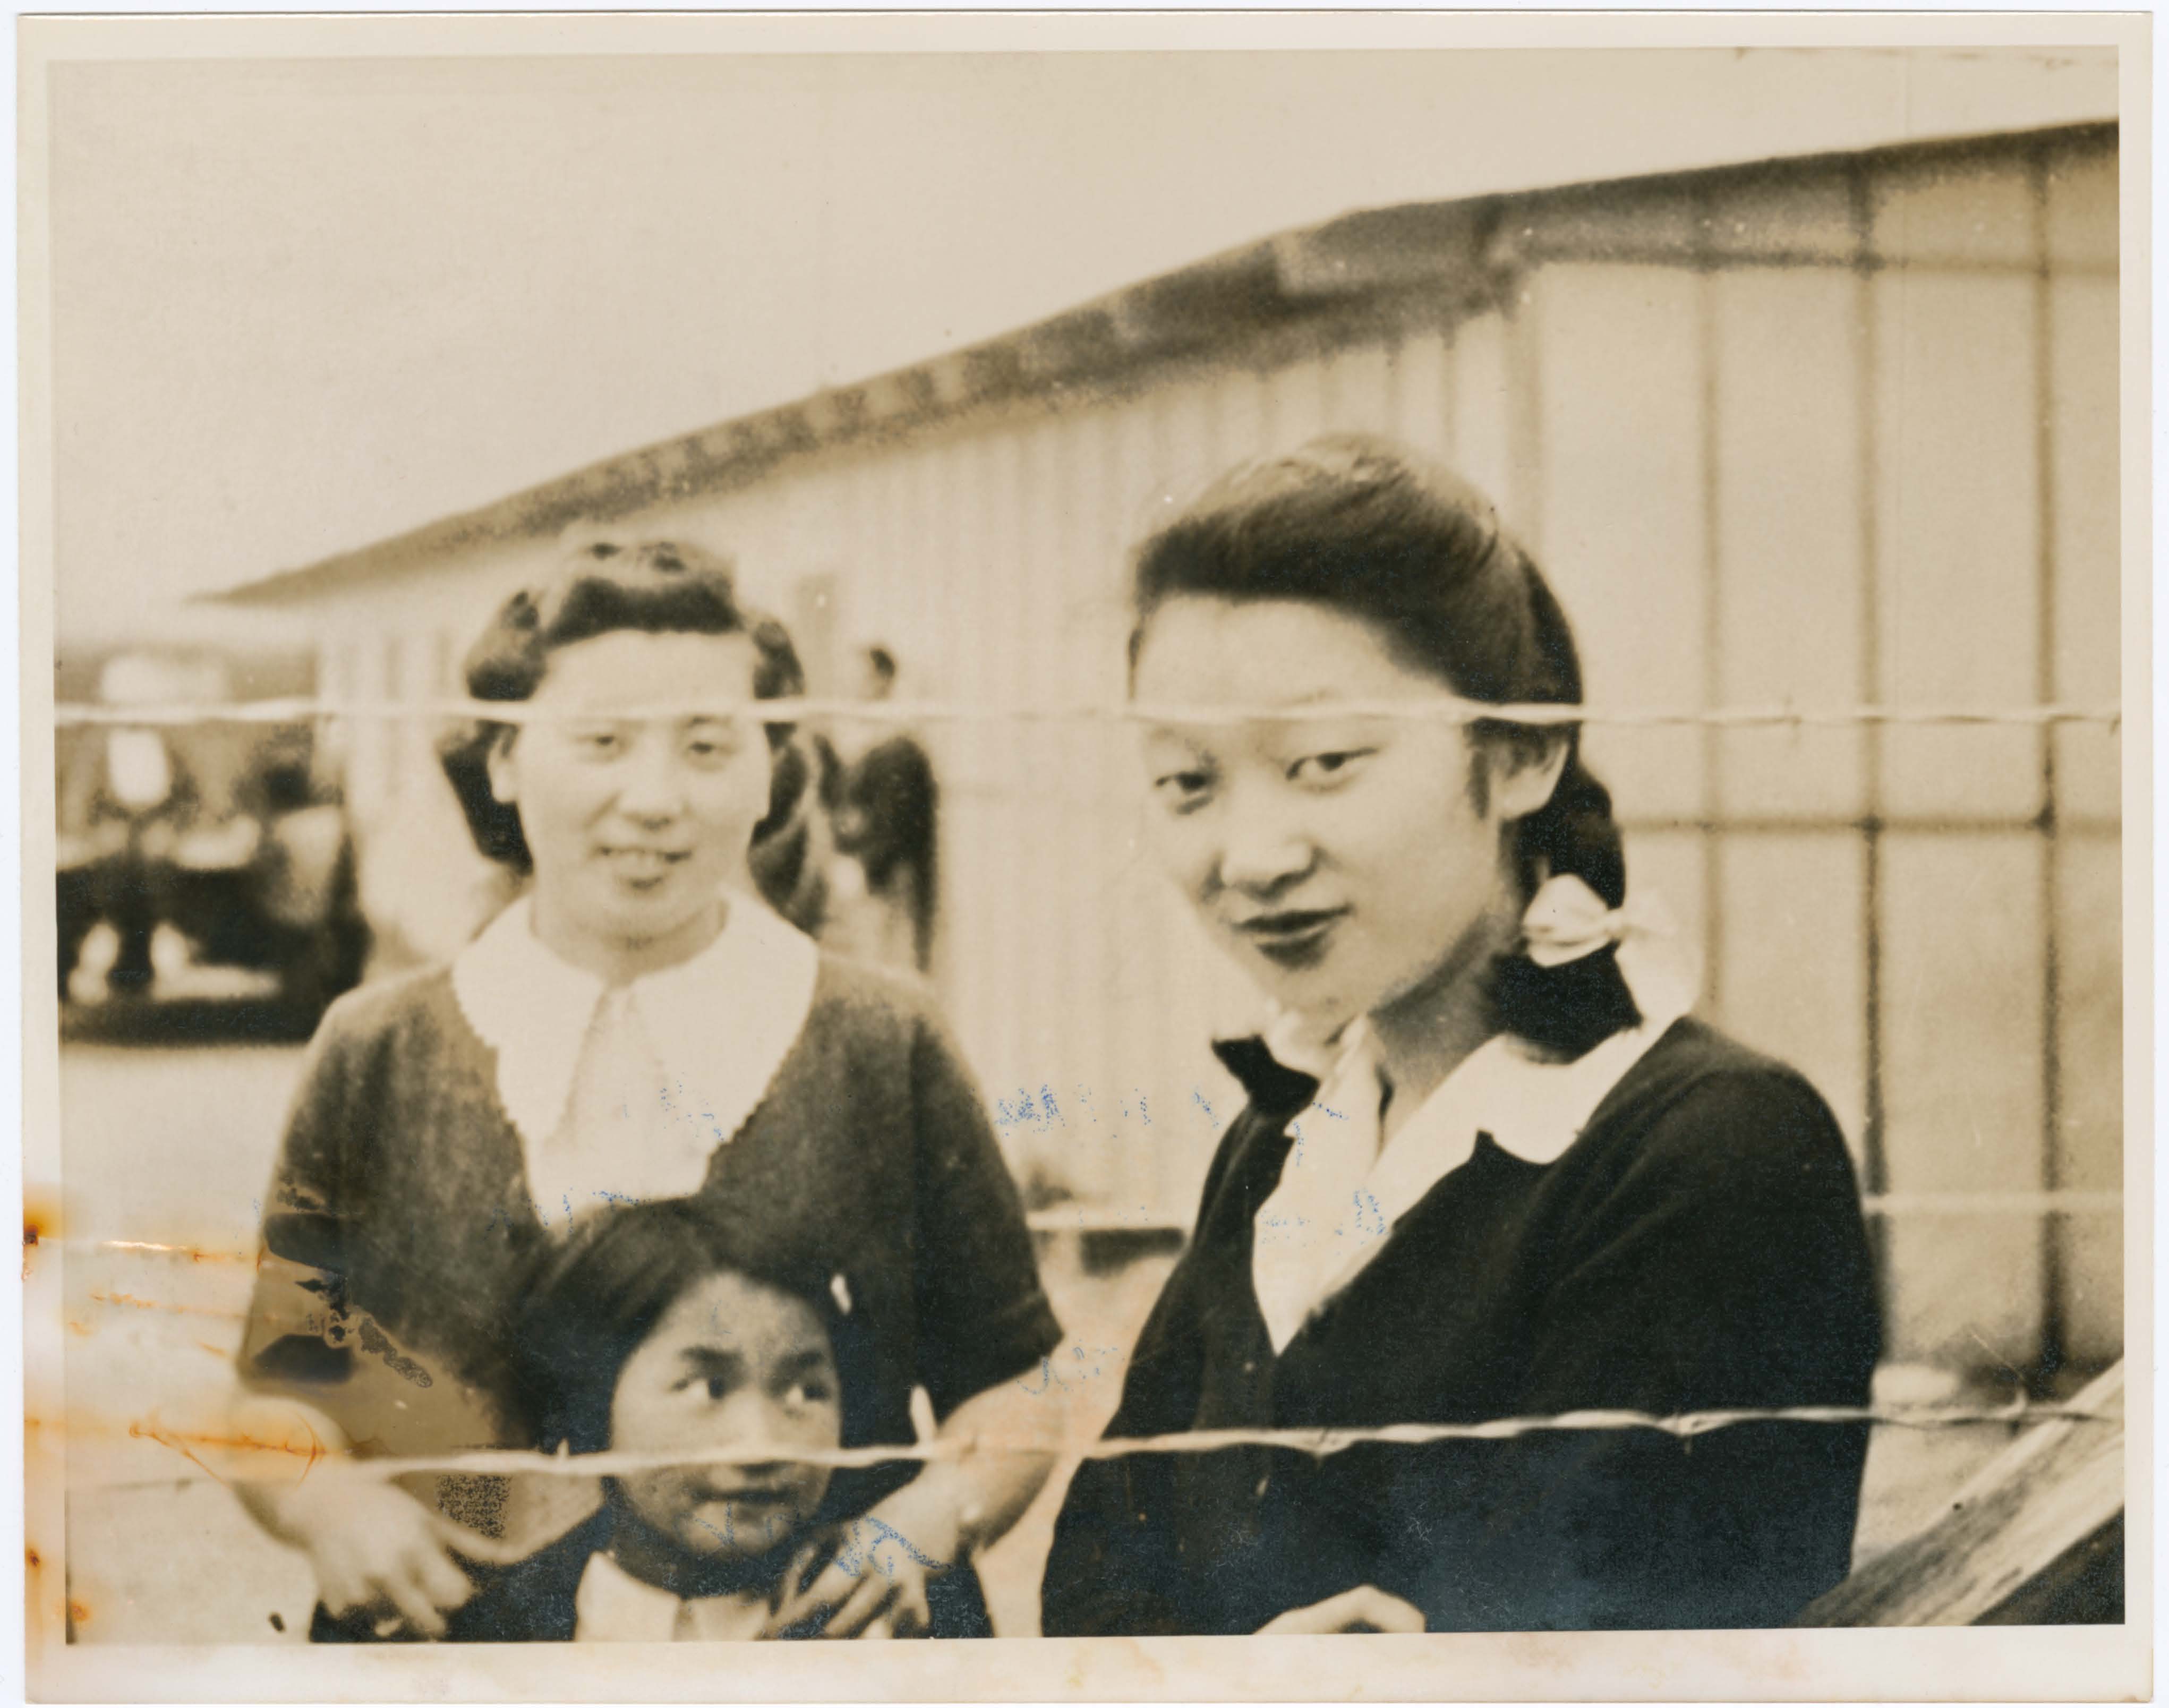 Two women and a young child behind a chain link fence.